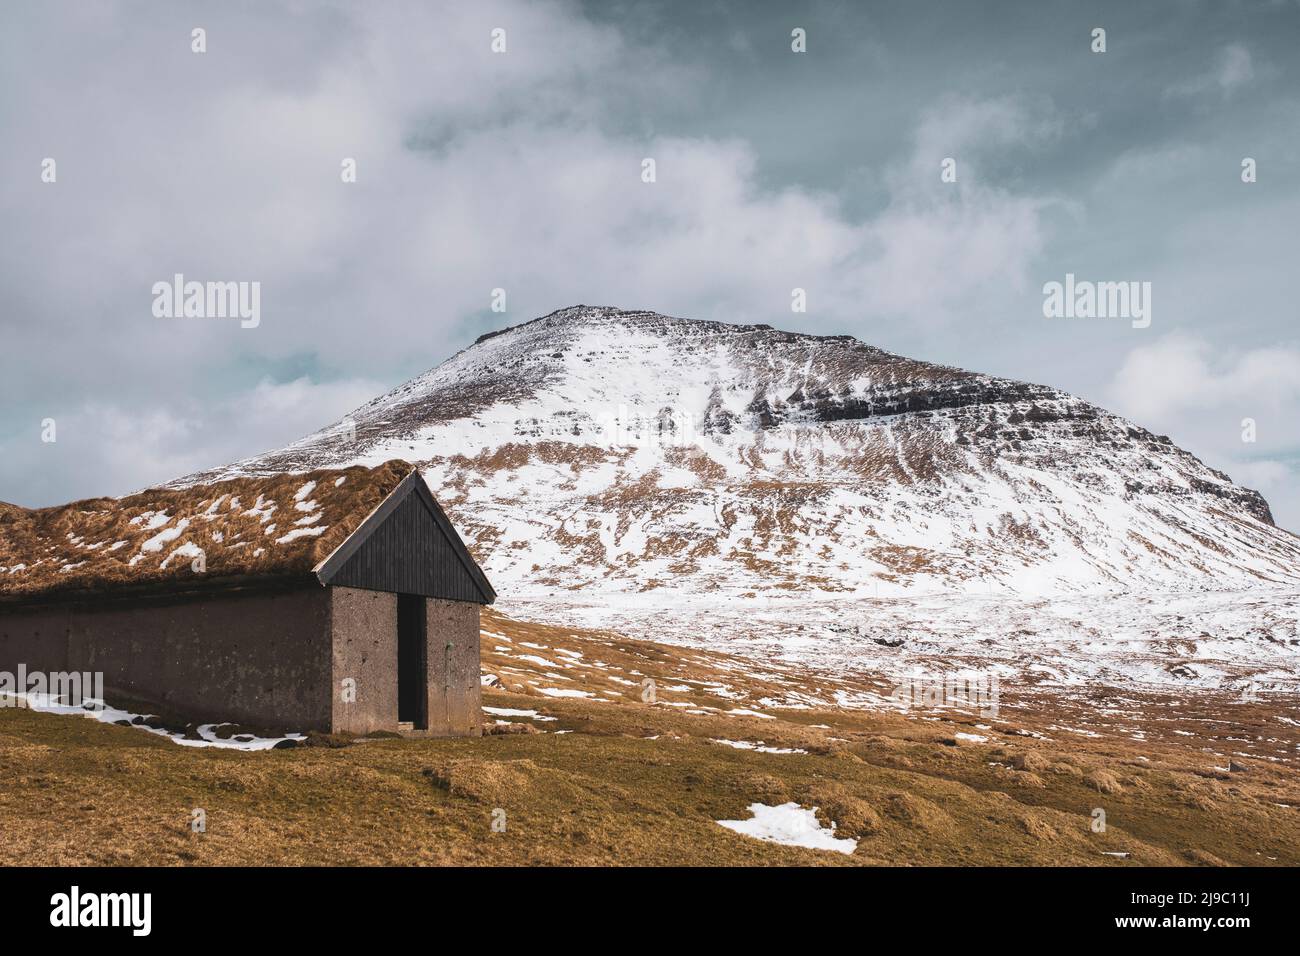 The traditional stone and natural roof of this farm building blend in with the colours of the majestic snowy mountain behind. Stock Photo